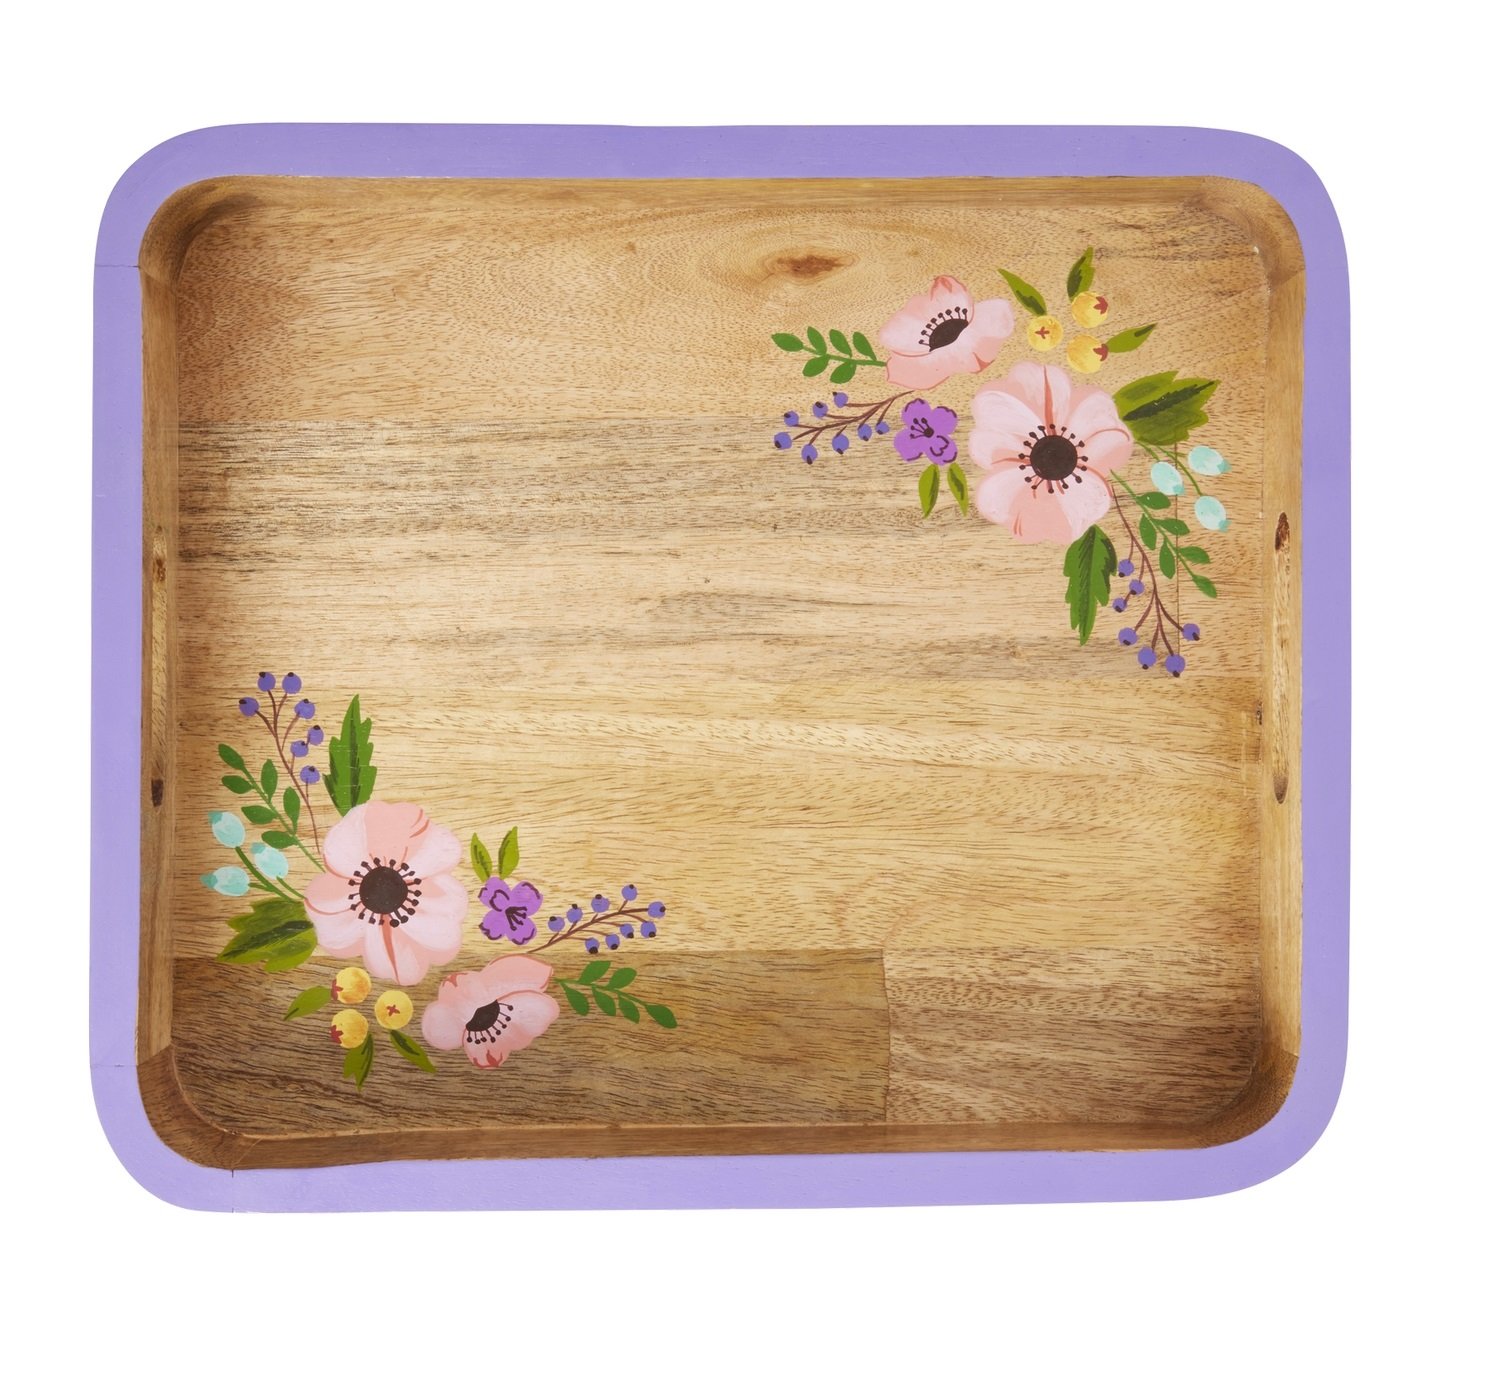 Rice - Rectangular Wooden Tray with Handpainted Purple Edge and Flowers Small Wood/Purple